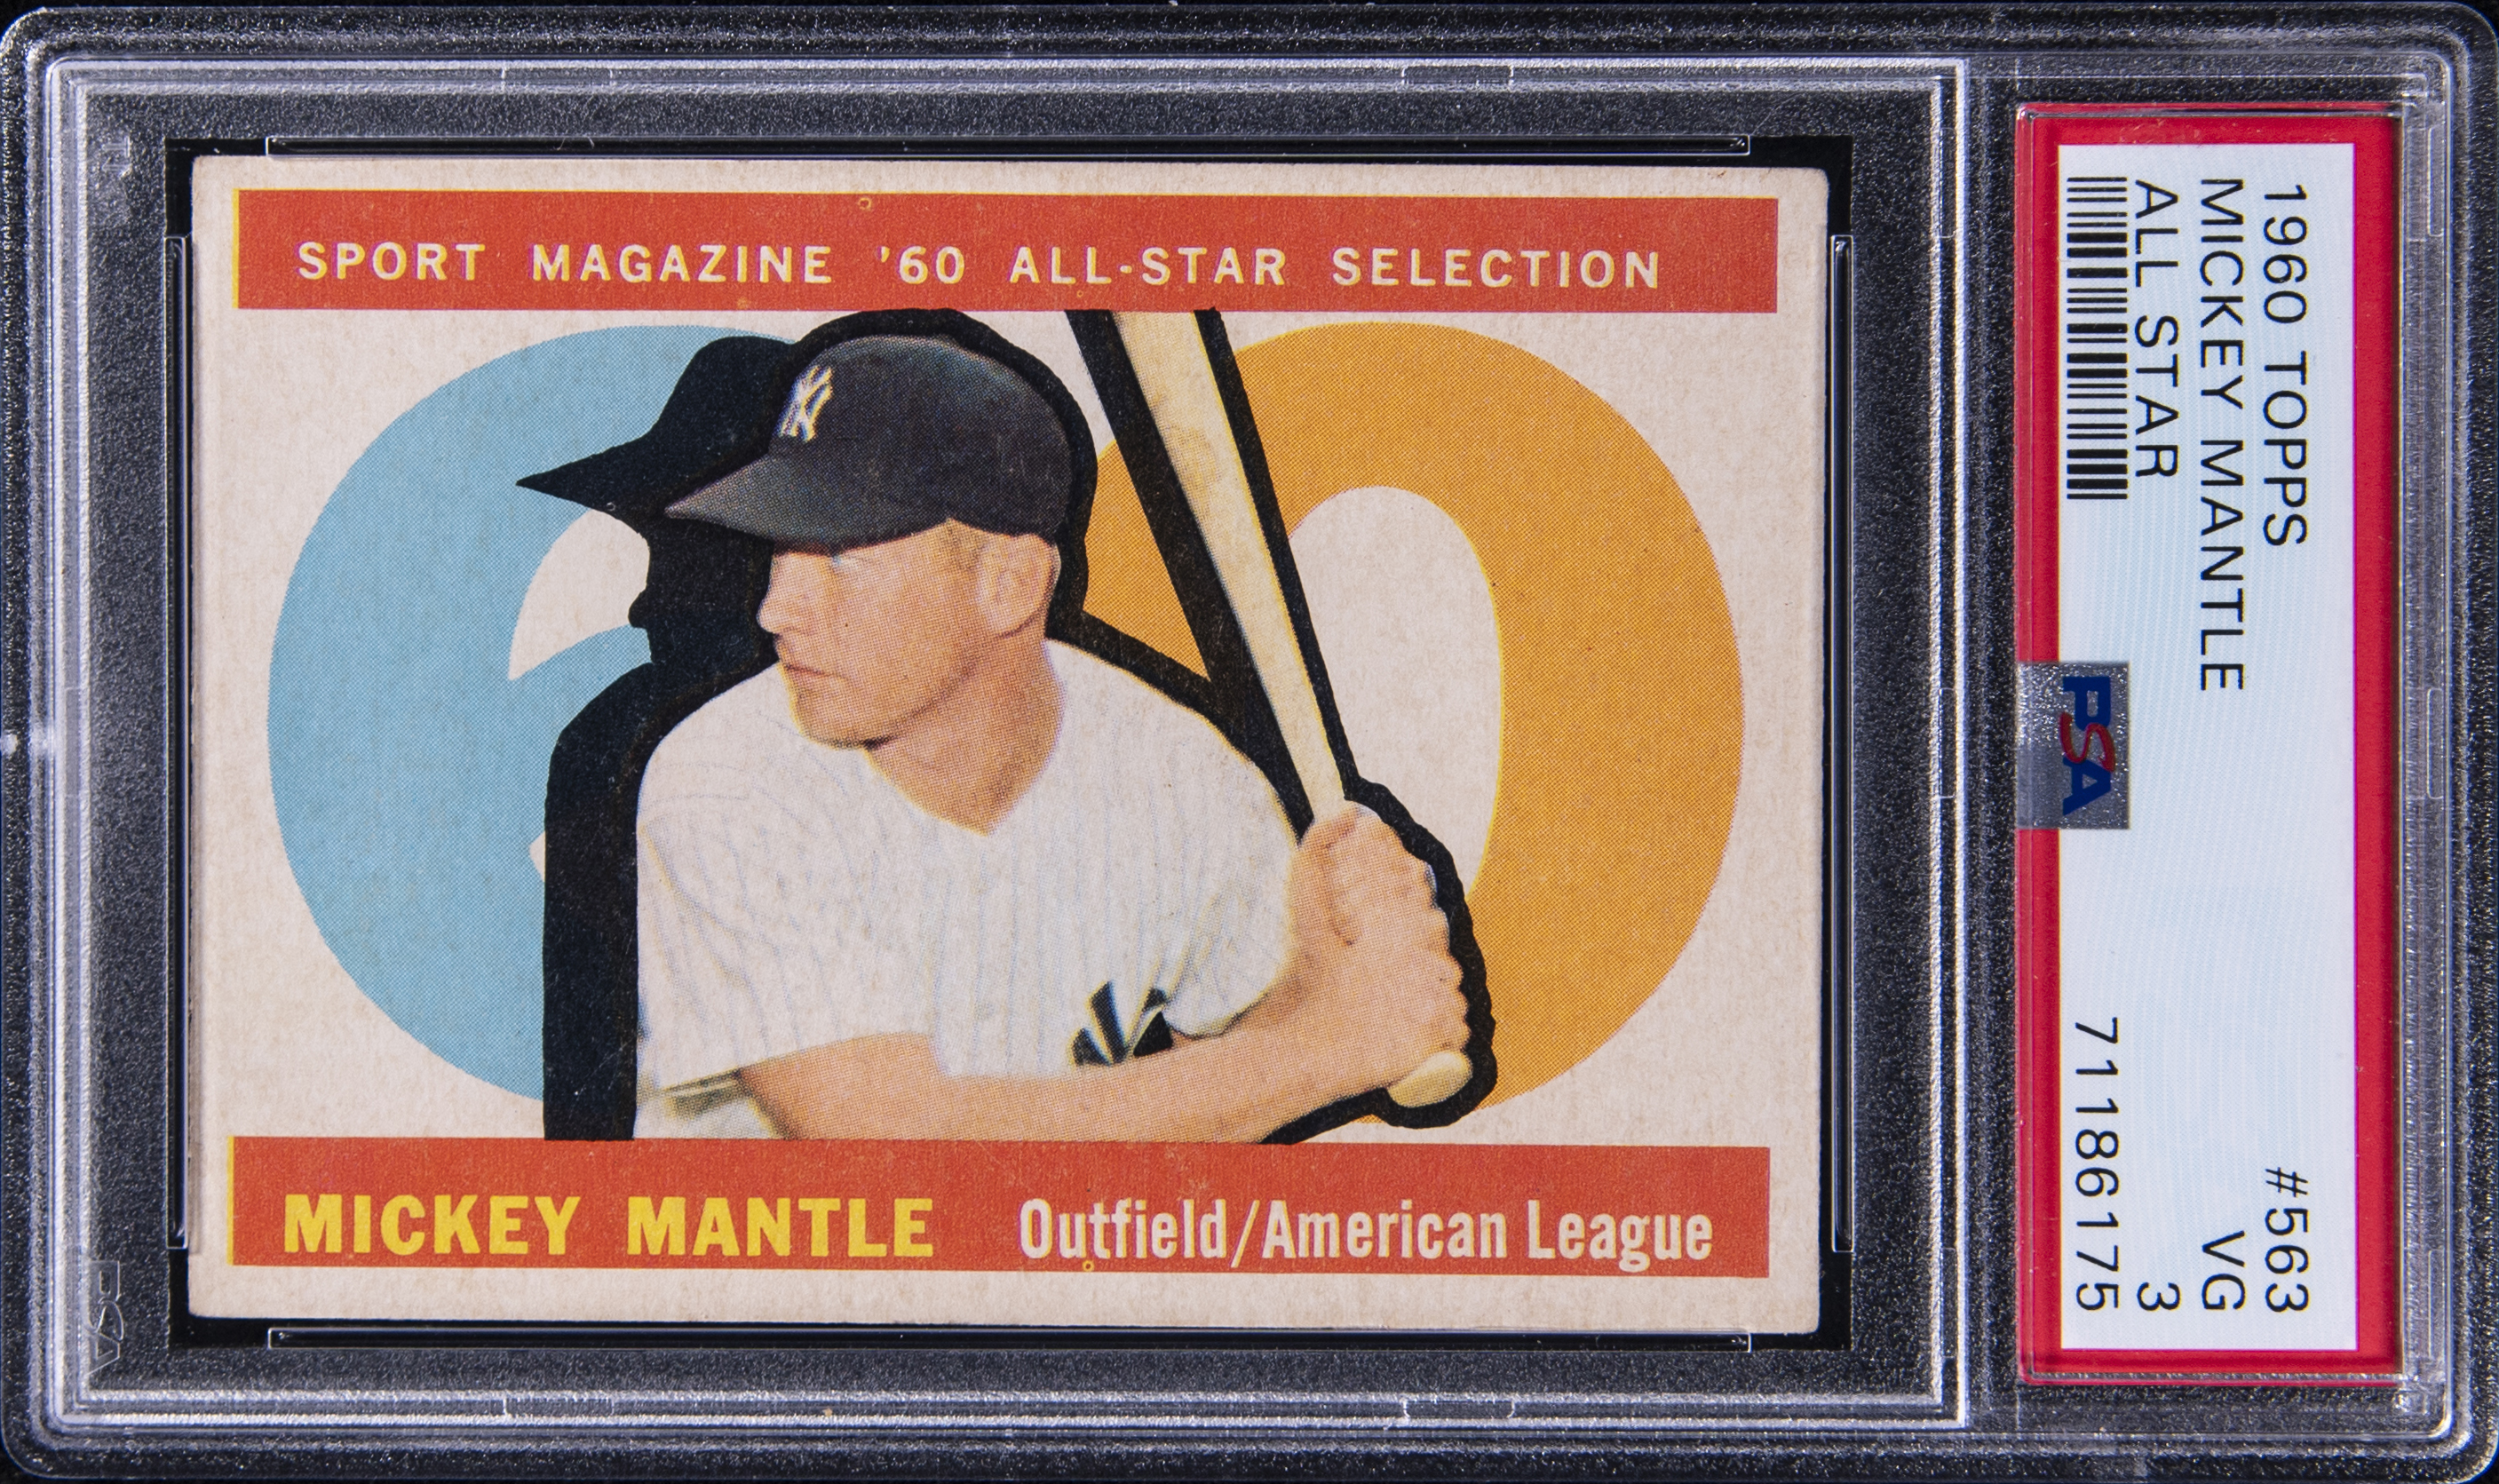 1960 Topps All Star #563 Mickey Mantle – PSA VG 3